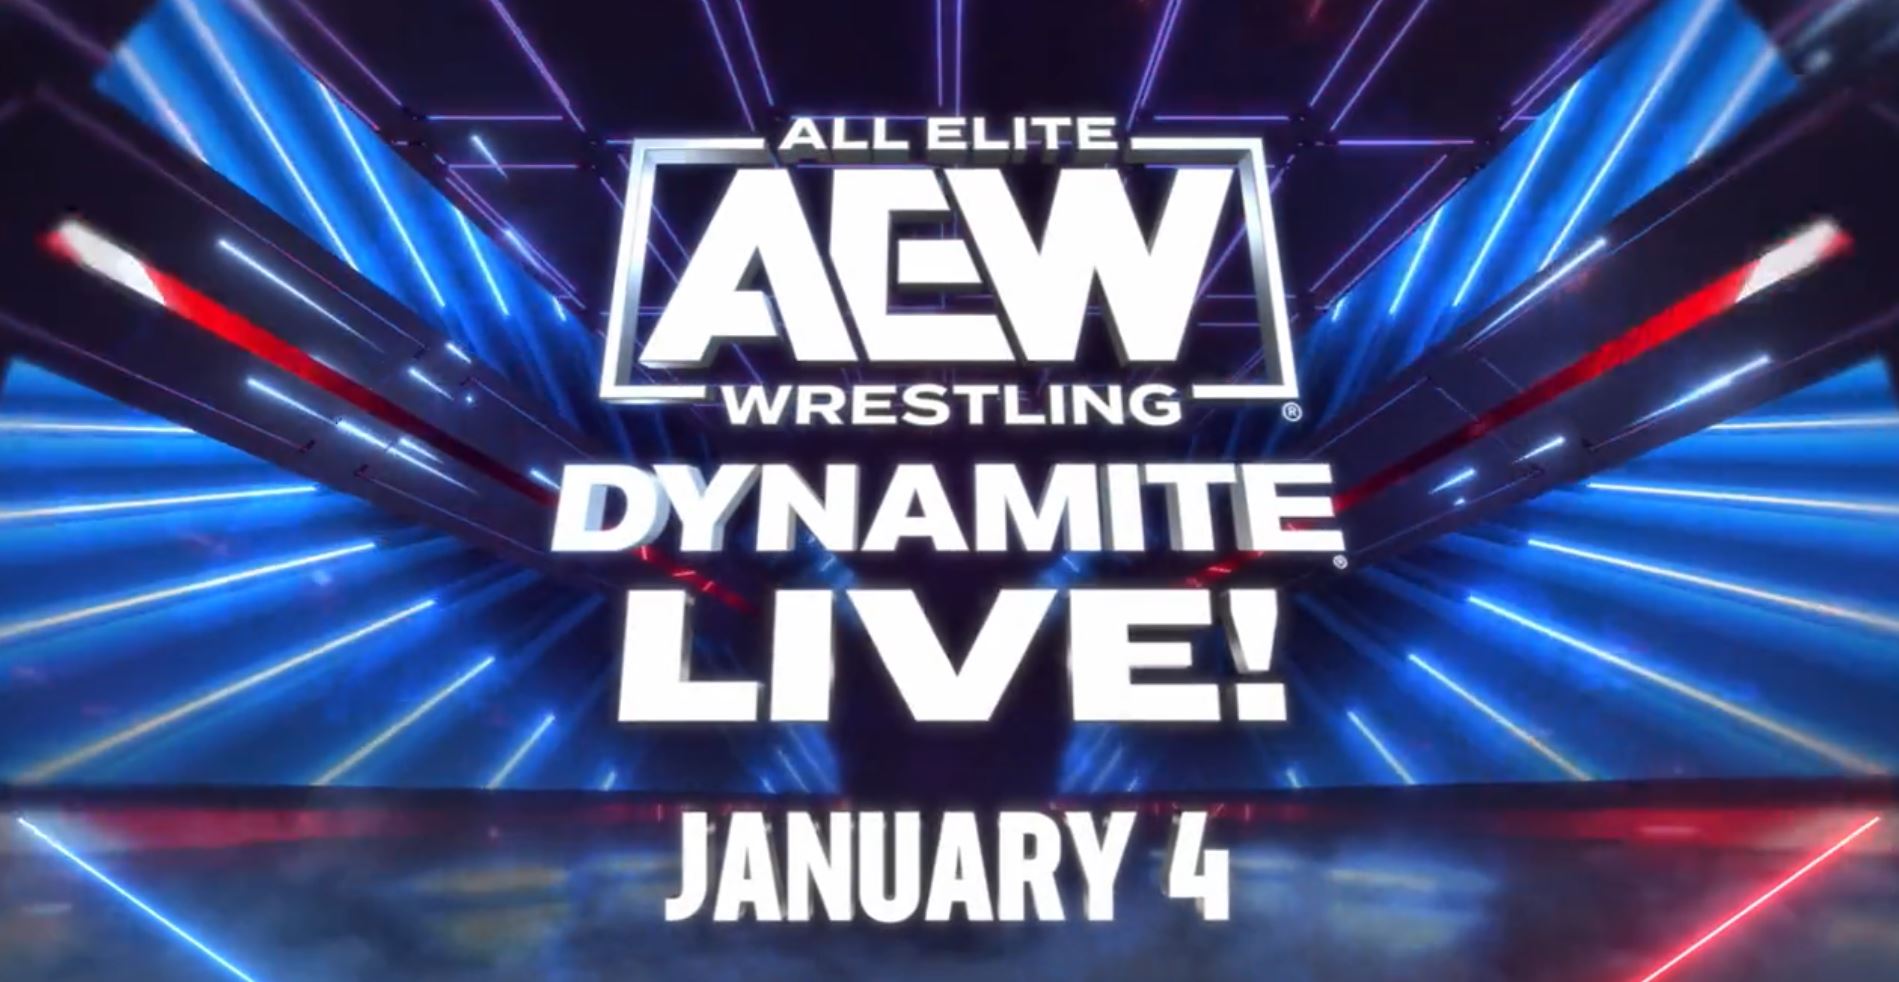 Tony Khan Books Title Match for the First AEW Dynamite of 2023